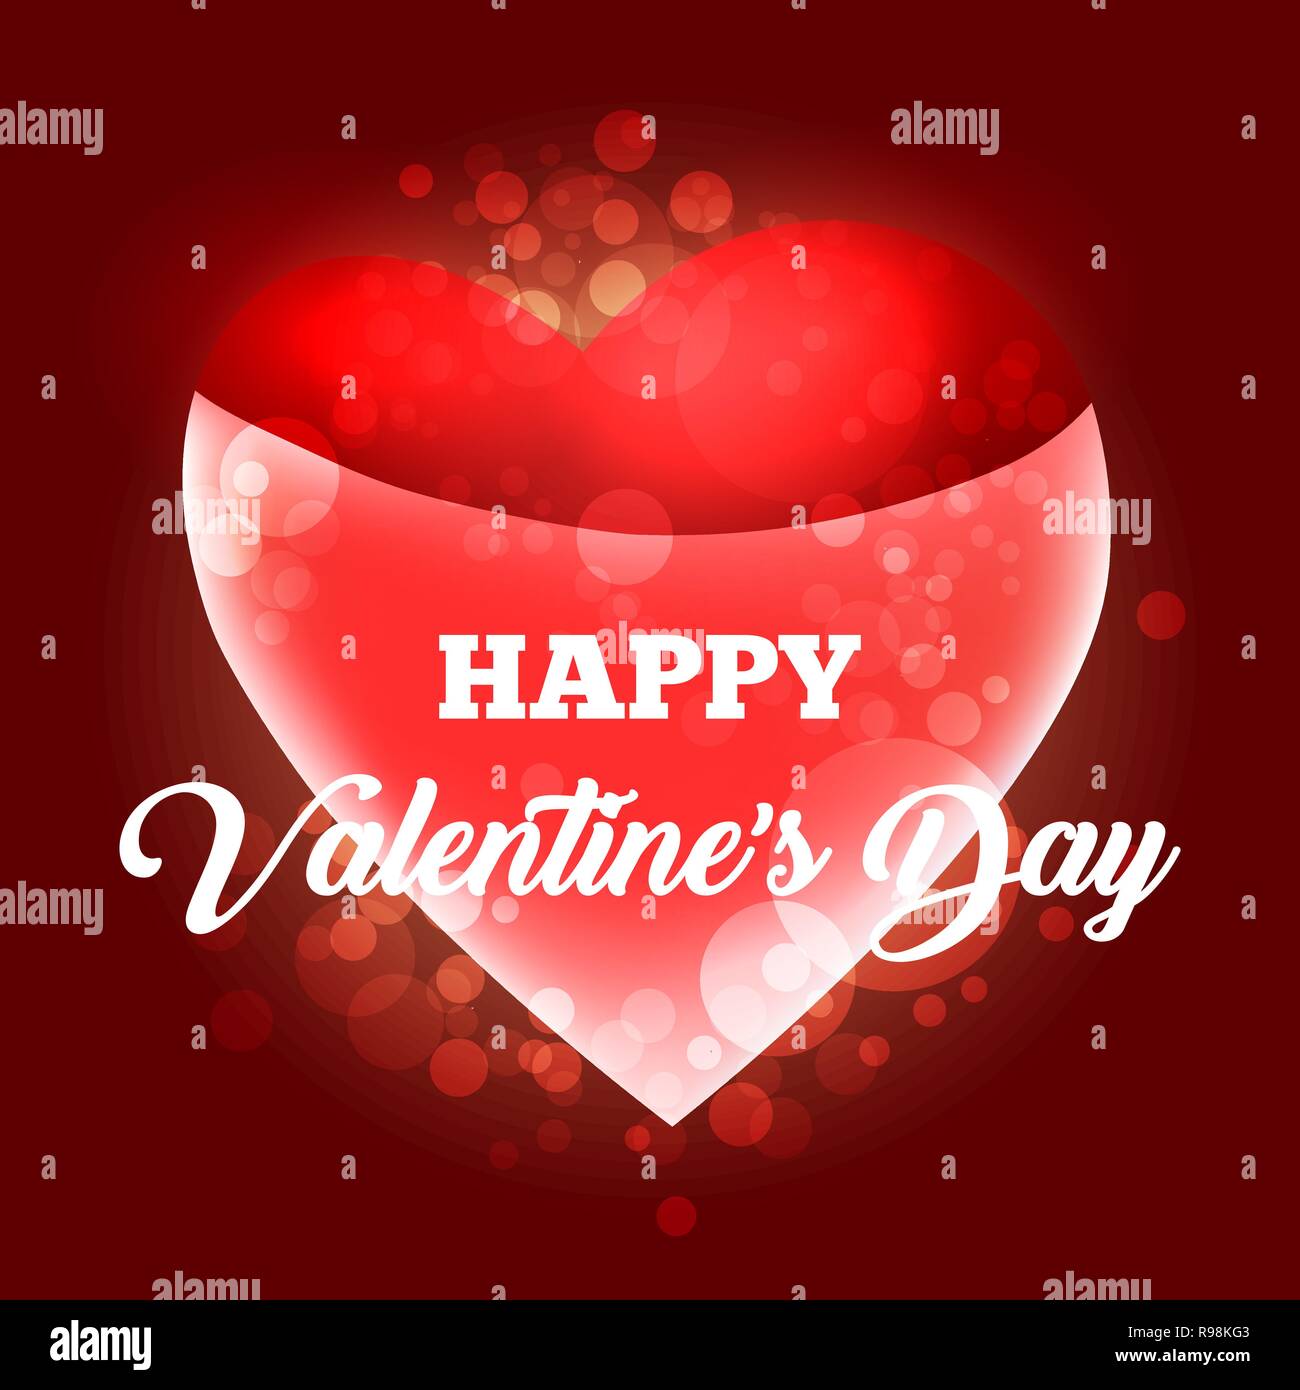 Happy Valentine's day Greeting Card template. Vector illustration. Stock Vector